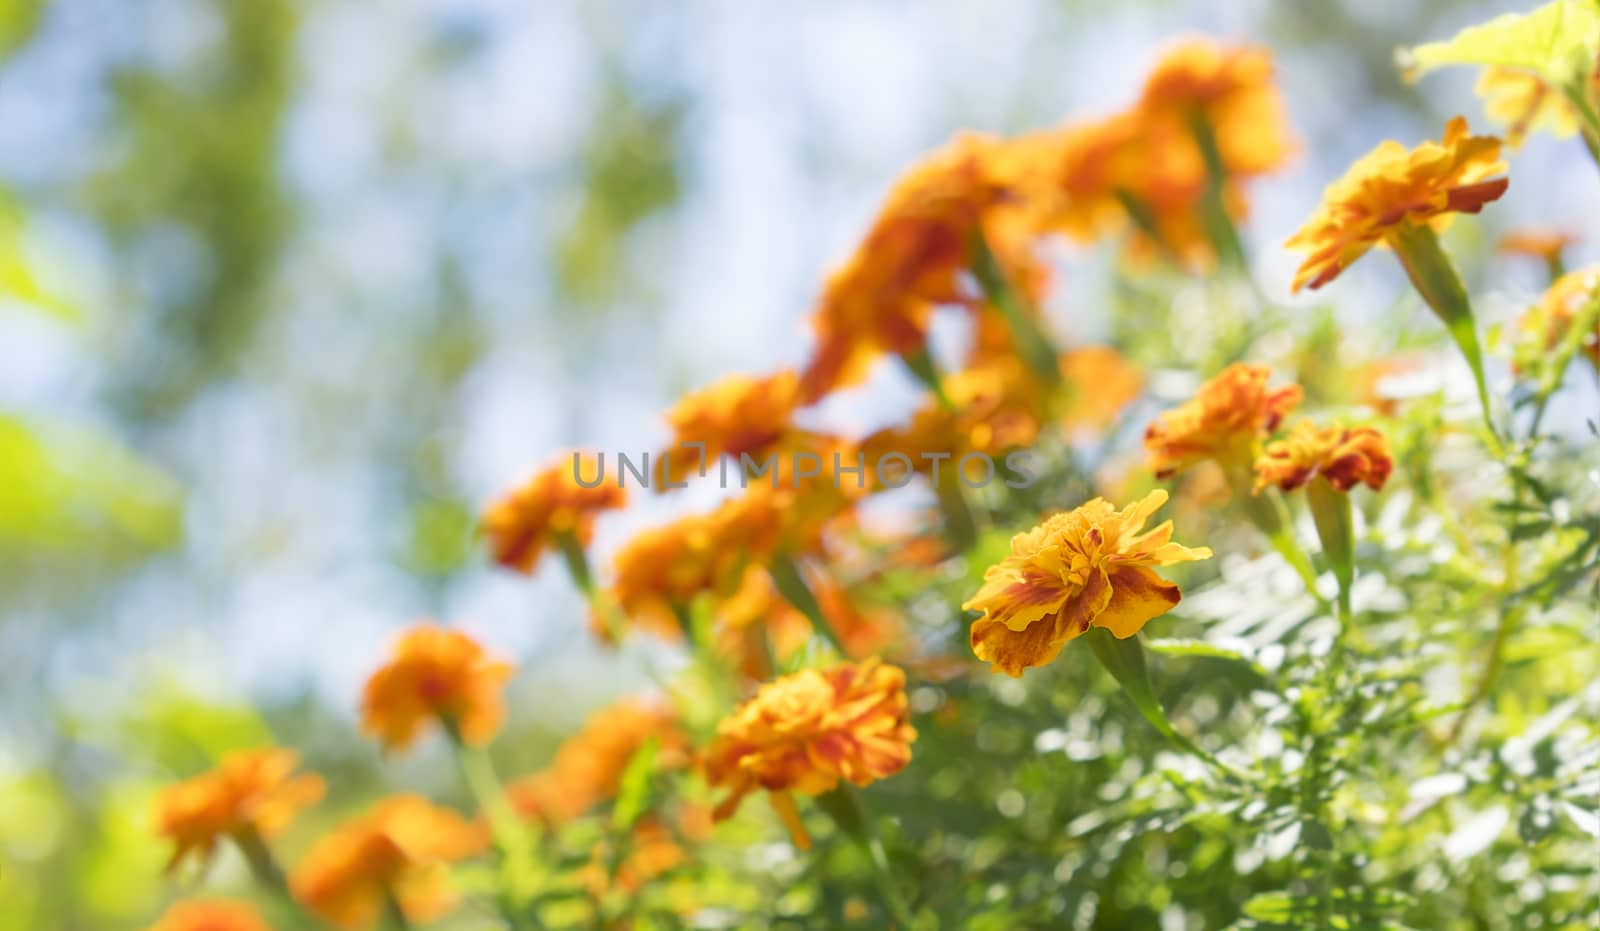 Bright yellow and orange marigolds growing in garden on a sunny day